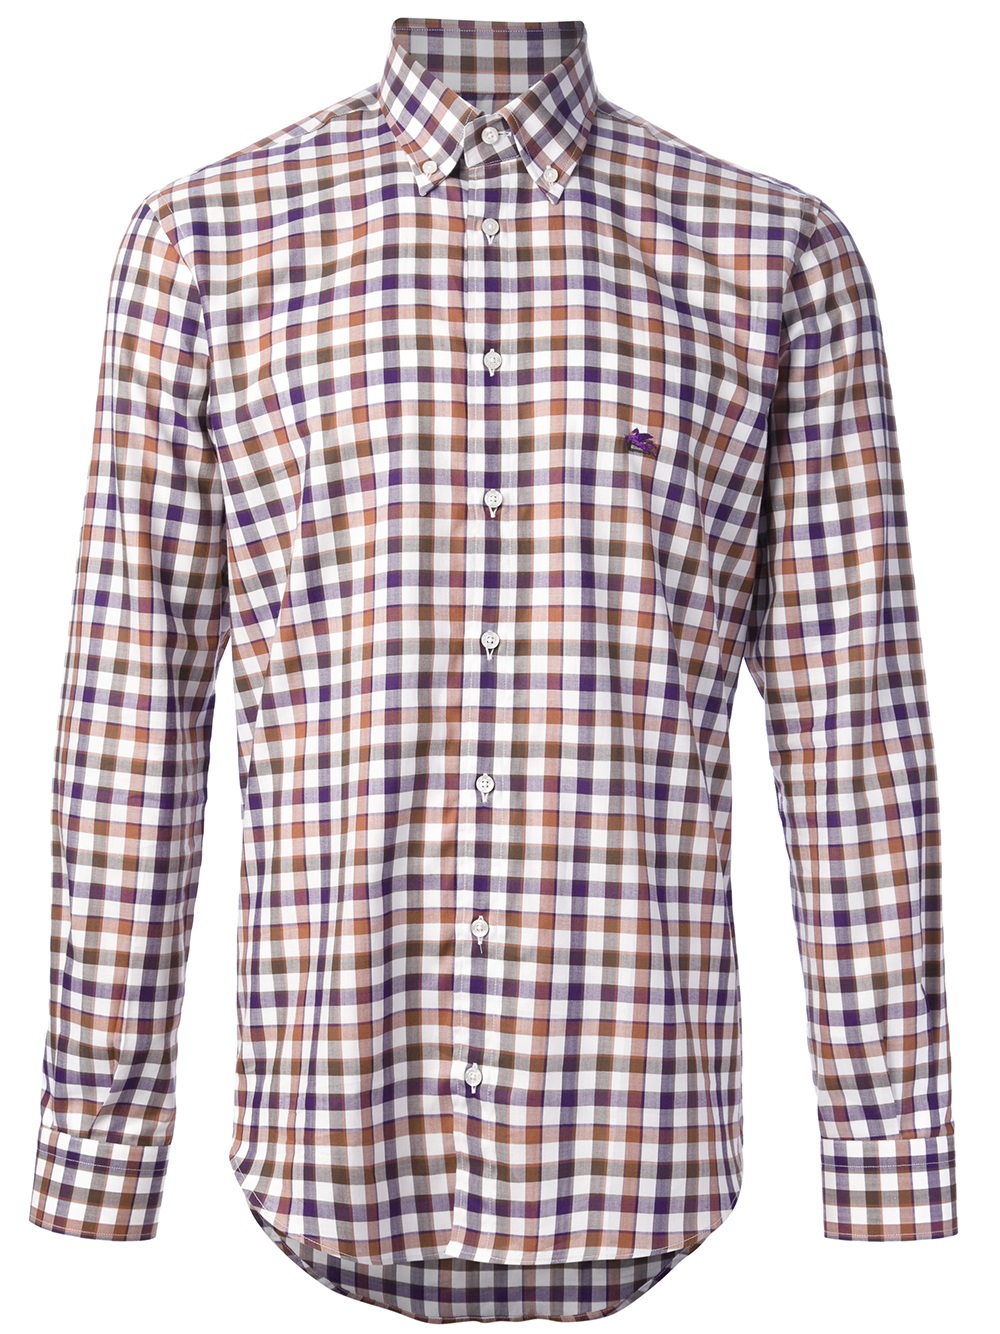 Etro Checked Dress Shirt in Brown for Men - Lyst